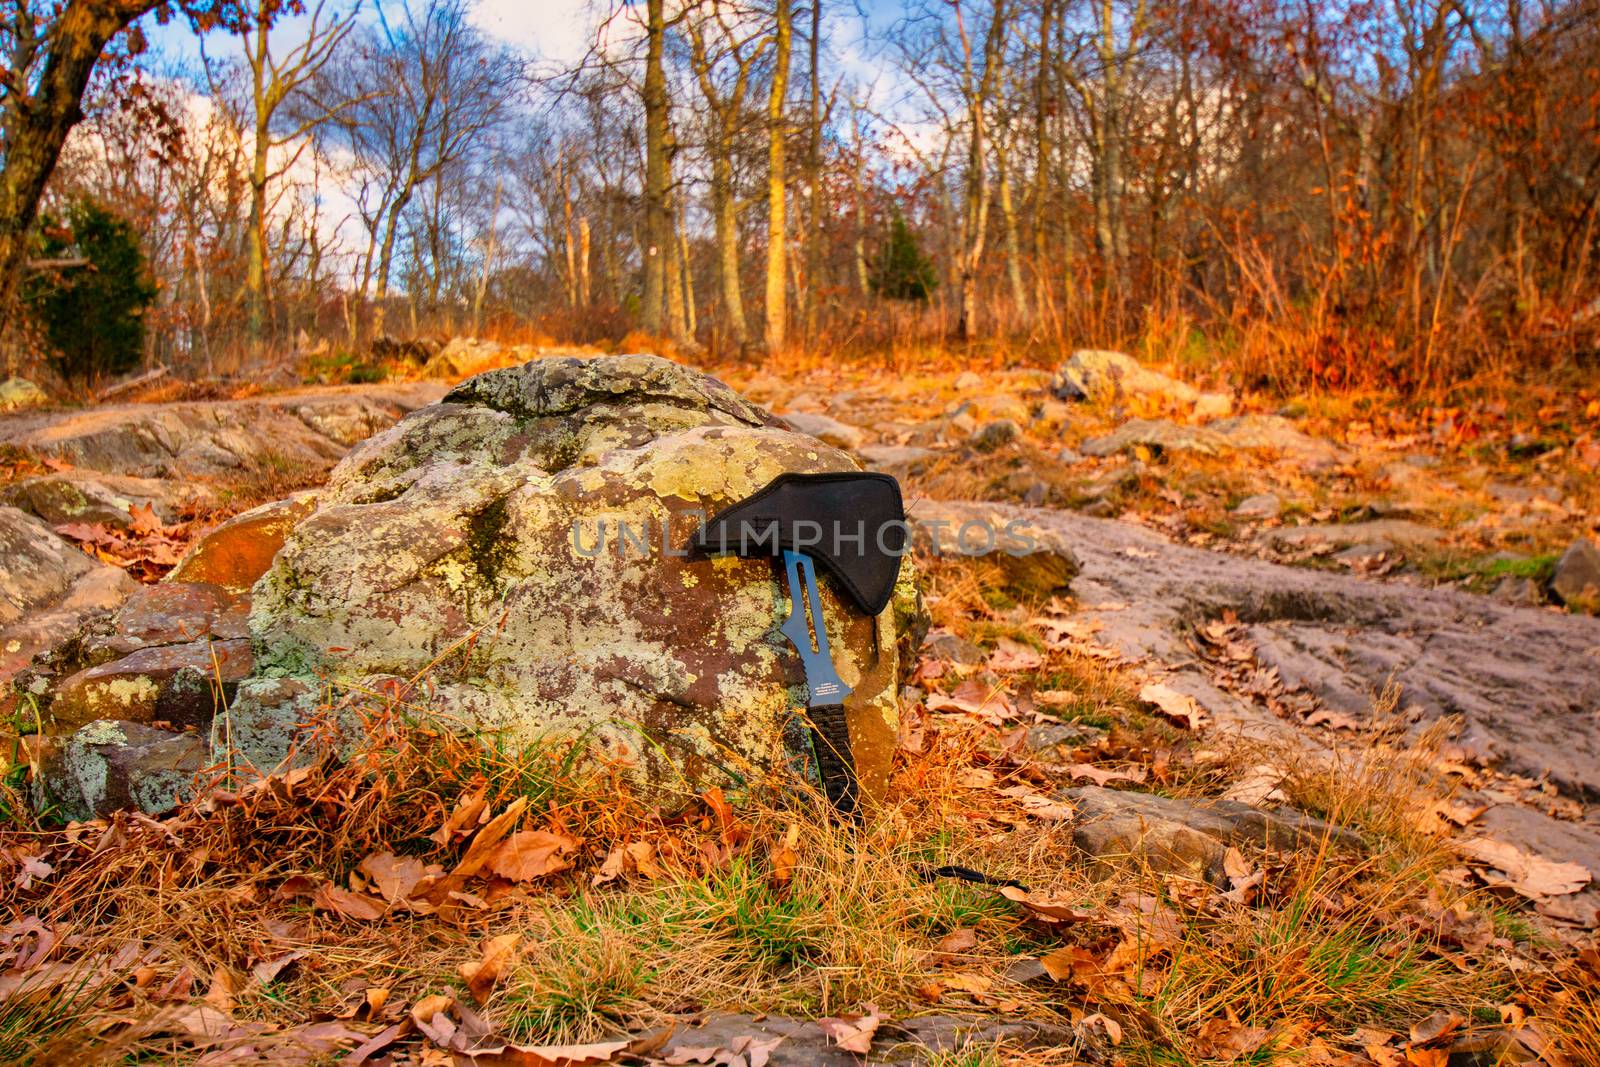 A Throwing Axe Leaning on a Rock in an Autumn Field by bju12290